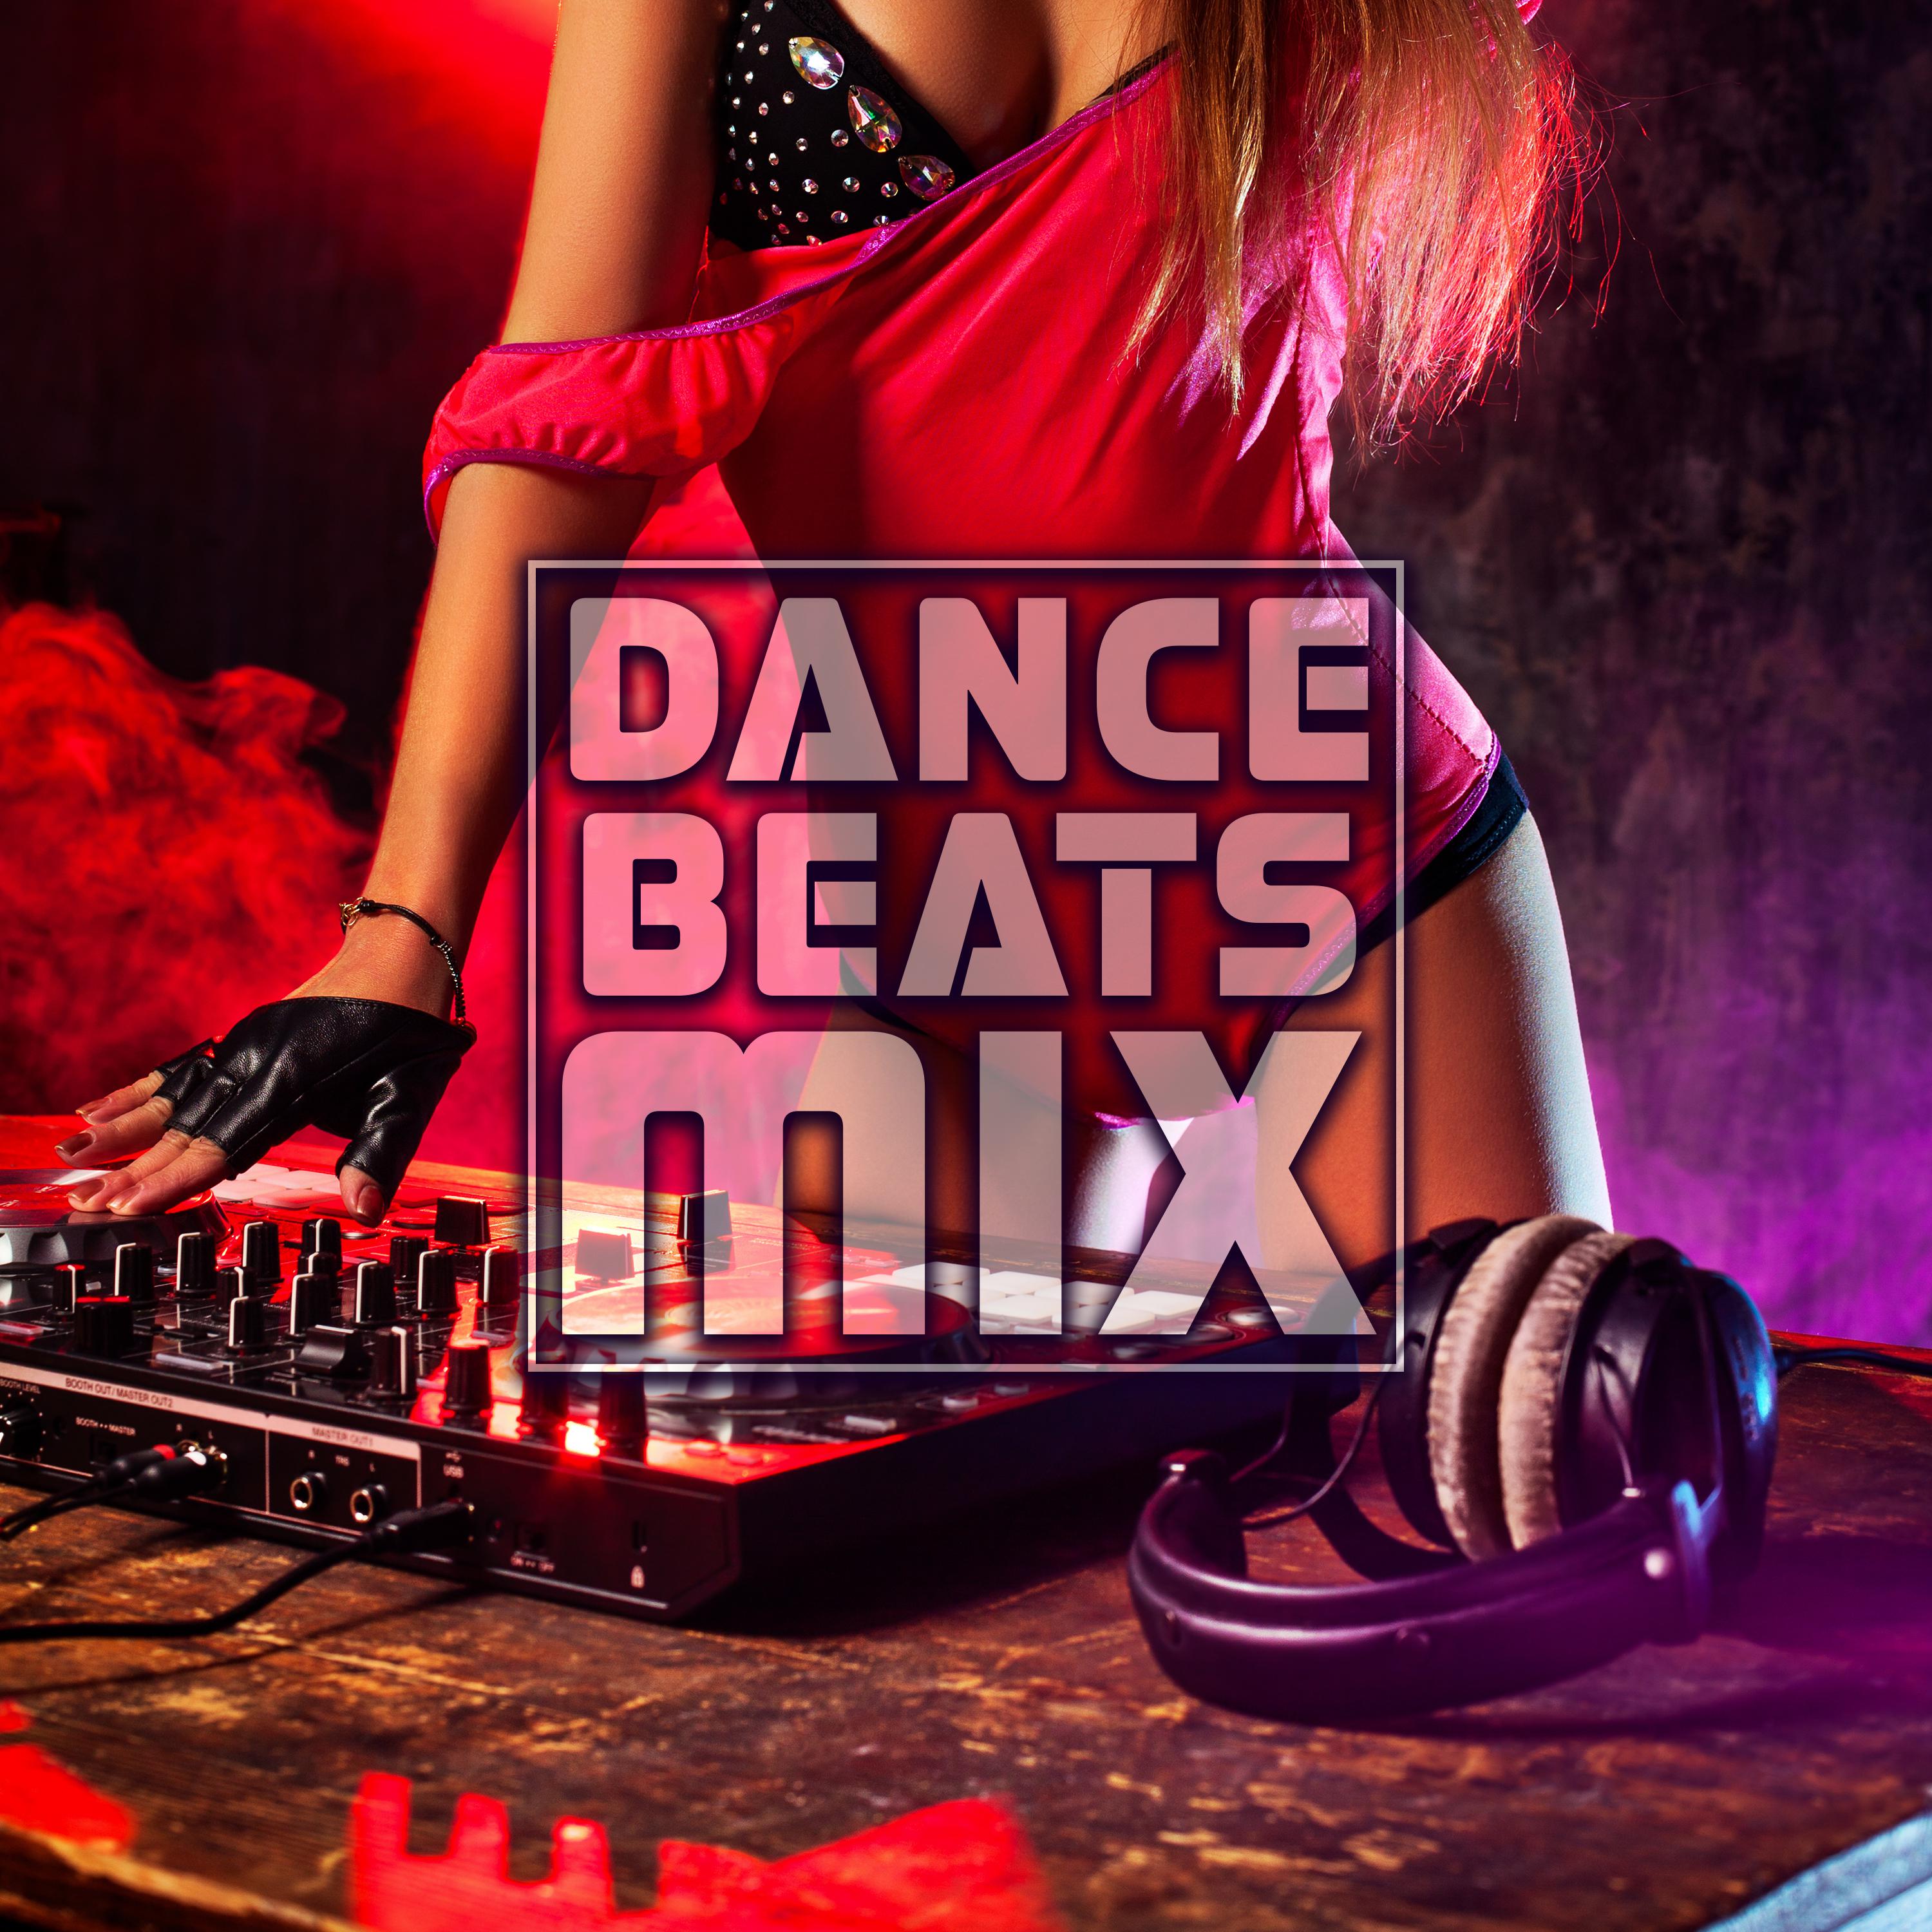 Dance Beats Mix (Hot Evening Party, Deep & Pure Trance Music, Energetic Rhythms, Progressive House, Spring Chillout Tracks, Top 100 of Cafe del Mar)